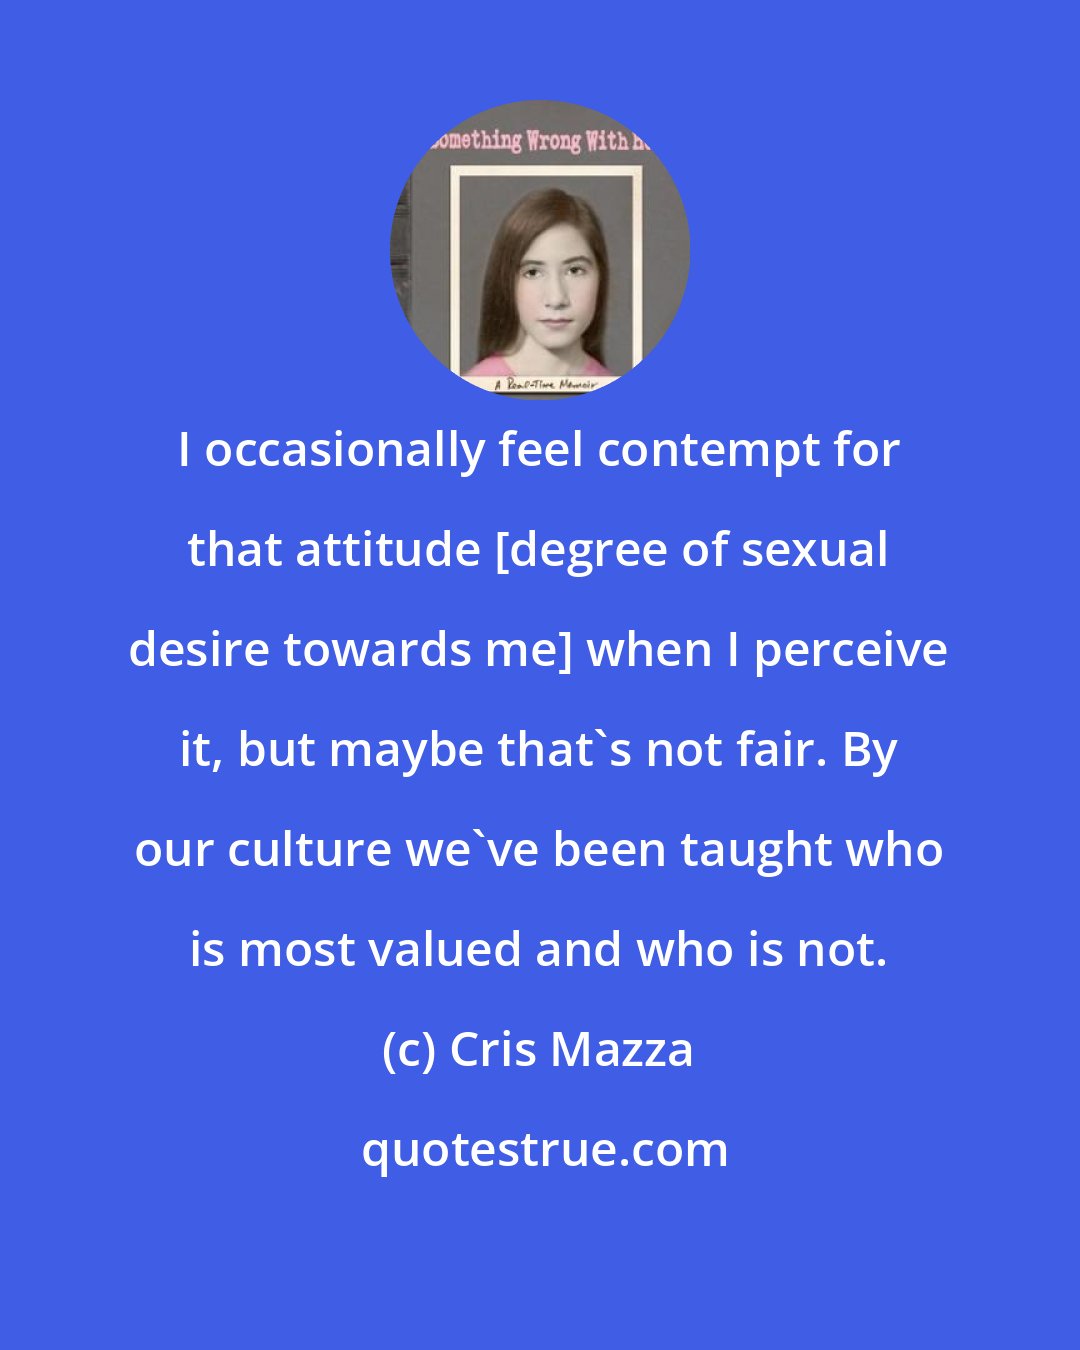 Cris Mazza: I occasionally feel contempt for that attitude [degree of sexual desire towards me] when I perceive it, but maybe that's not fair. By our culture we've been taught who is most valued and who is not.